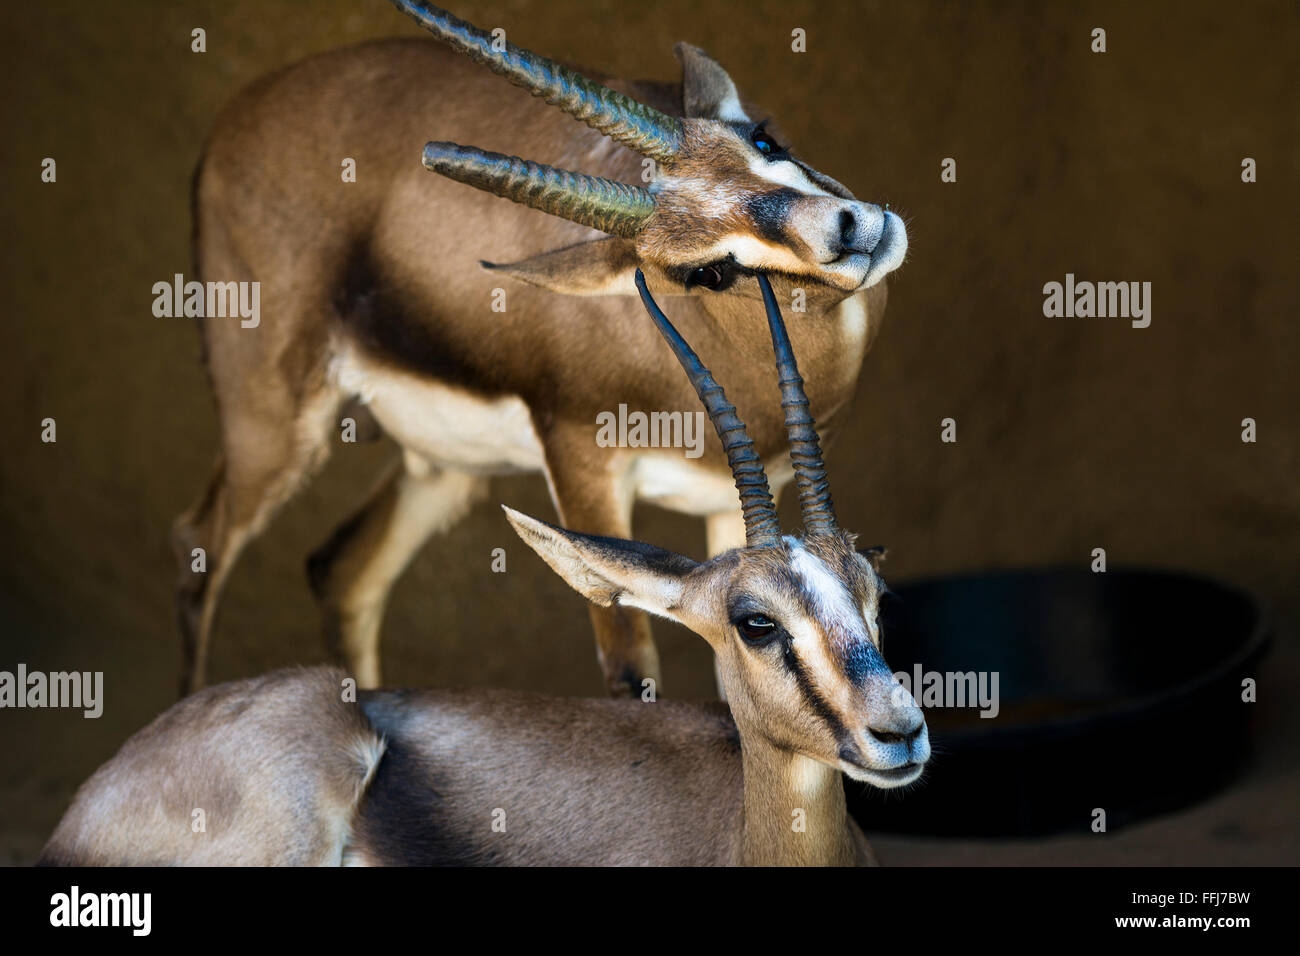 Two gazelles rest in a shaded area while one scratches its chin on the horn of another gazelle. Stock Photo